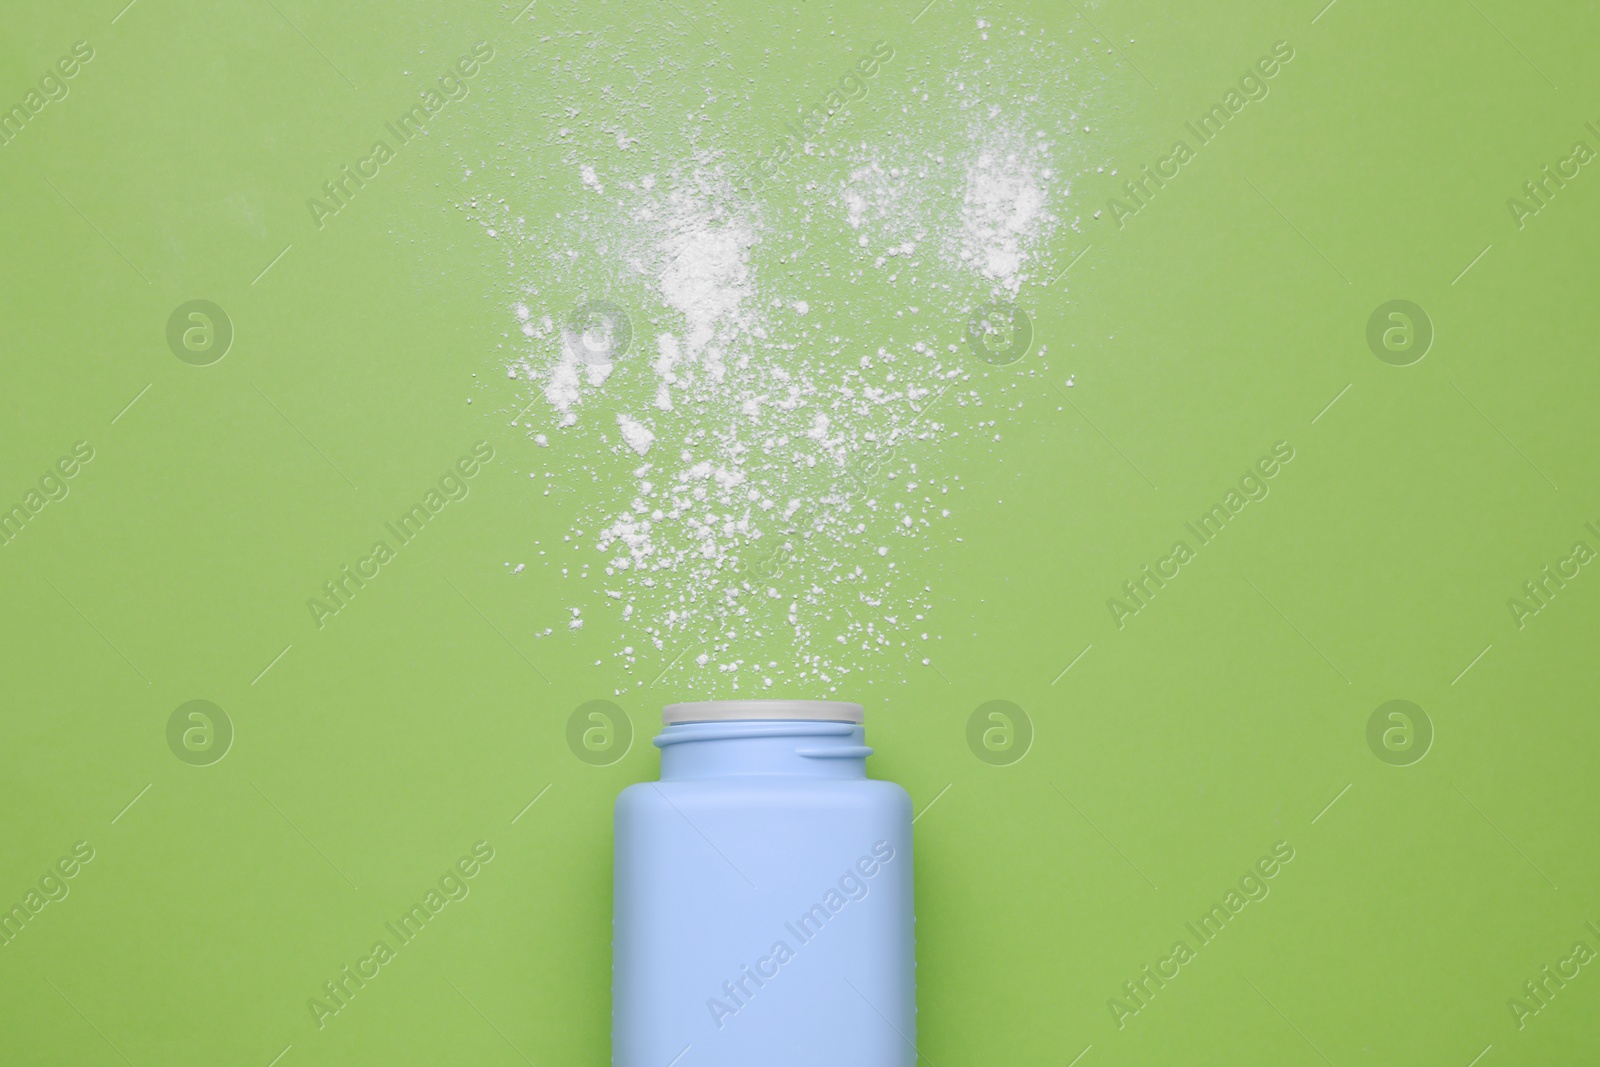 Photo of Bottle and scattered baby powder on green background, top view